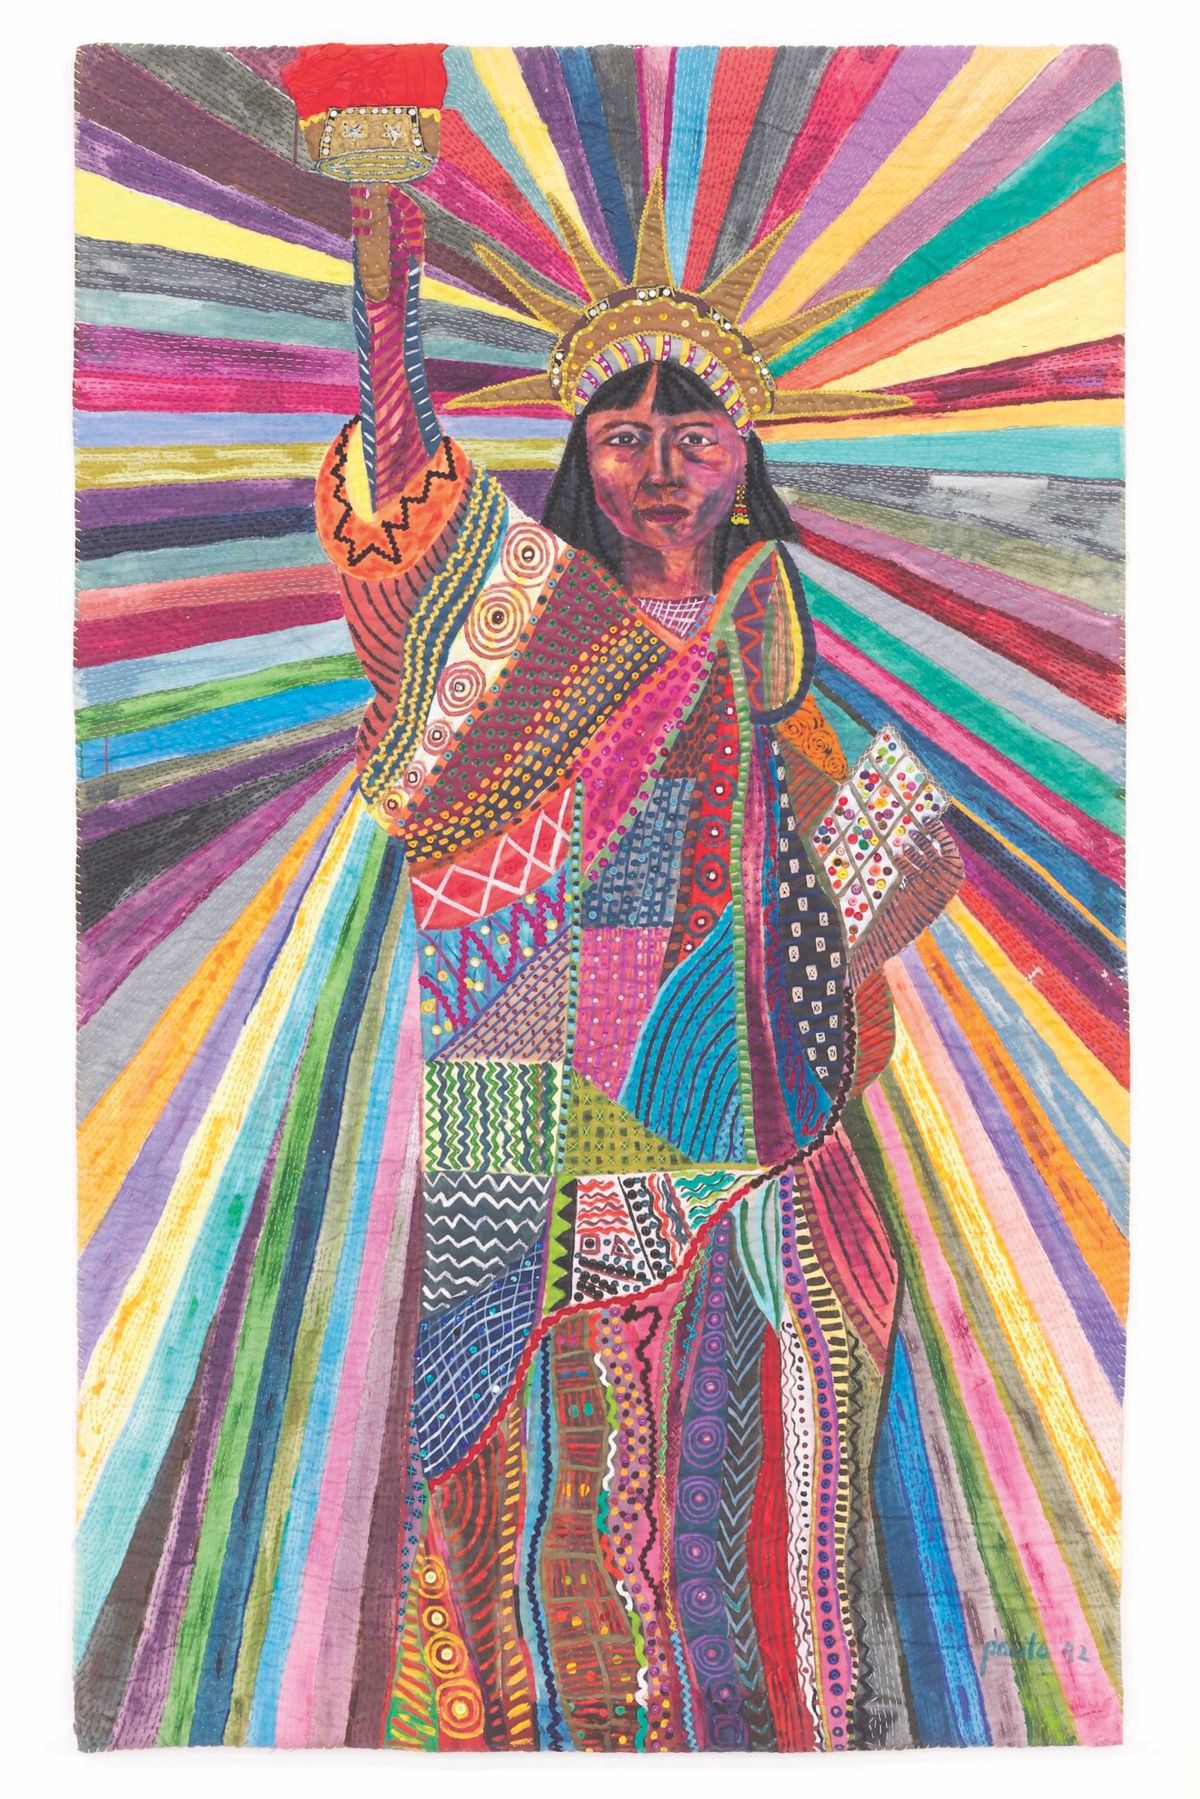 Pacita Abad, L.A. Liberty, 1992. Collection Walker Art Center, Minneapolis; T.B. Walker Acquisition Fund, 2022. Courtesy Pacita Abad Art Estate and Spike Island, Bristol. photo: Max McClure